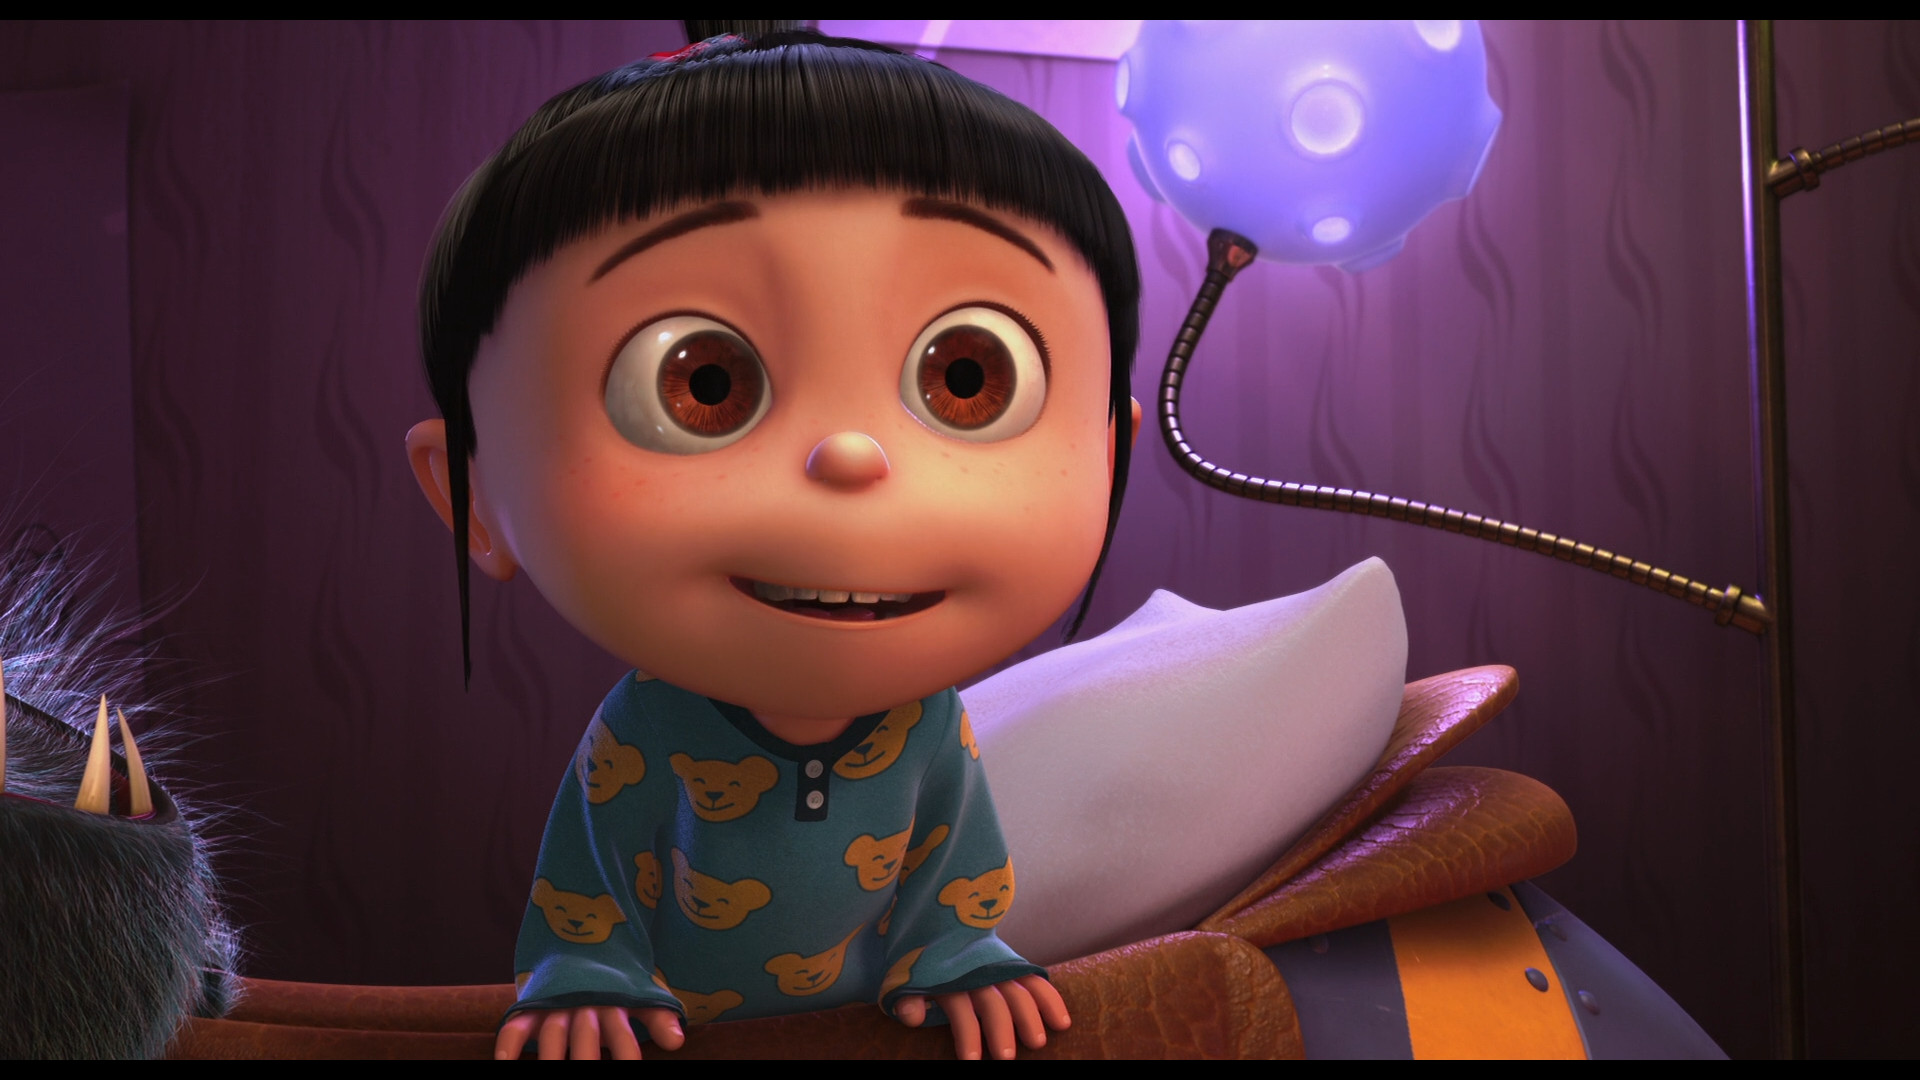 1920x1080 PC Agnes From Despicable Me Wallpapers, Israel Follis, P.67